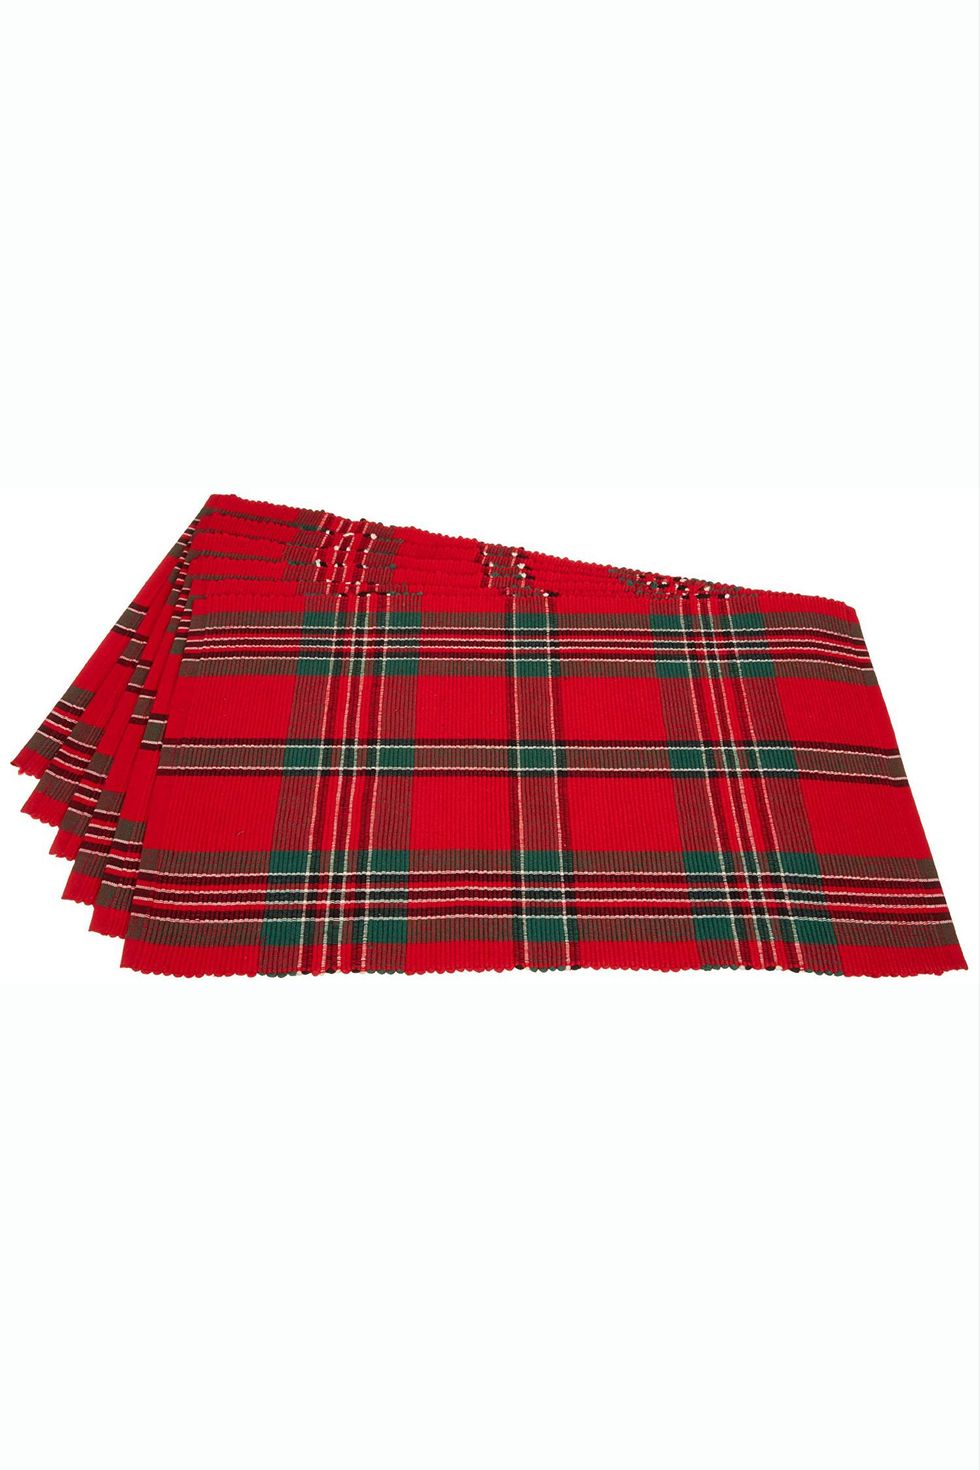 Cotton Holiday Plaid Placemats